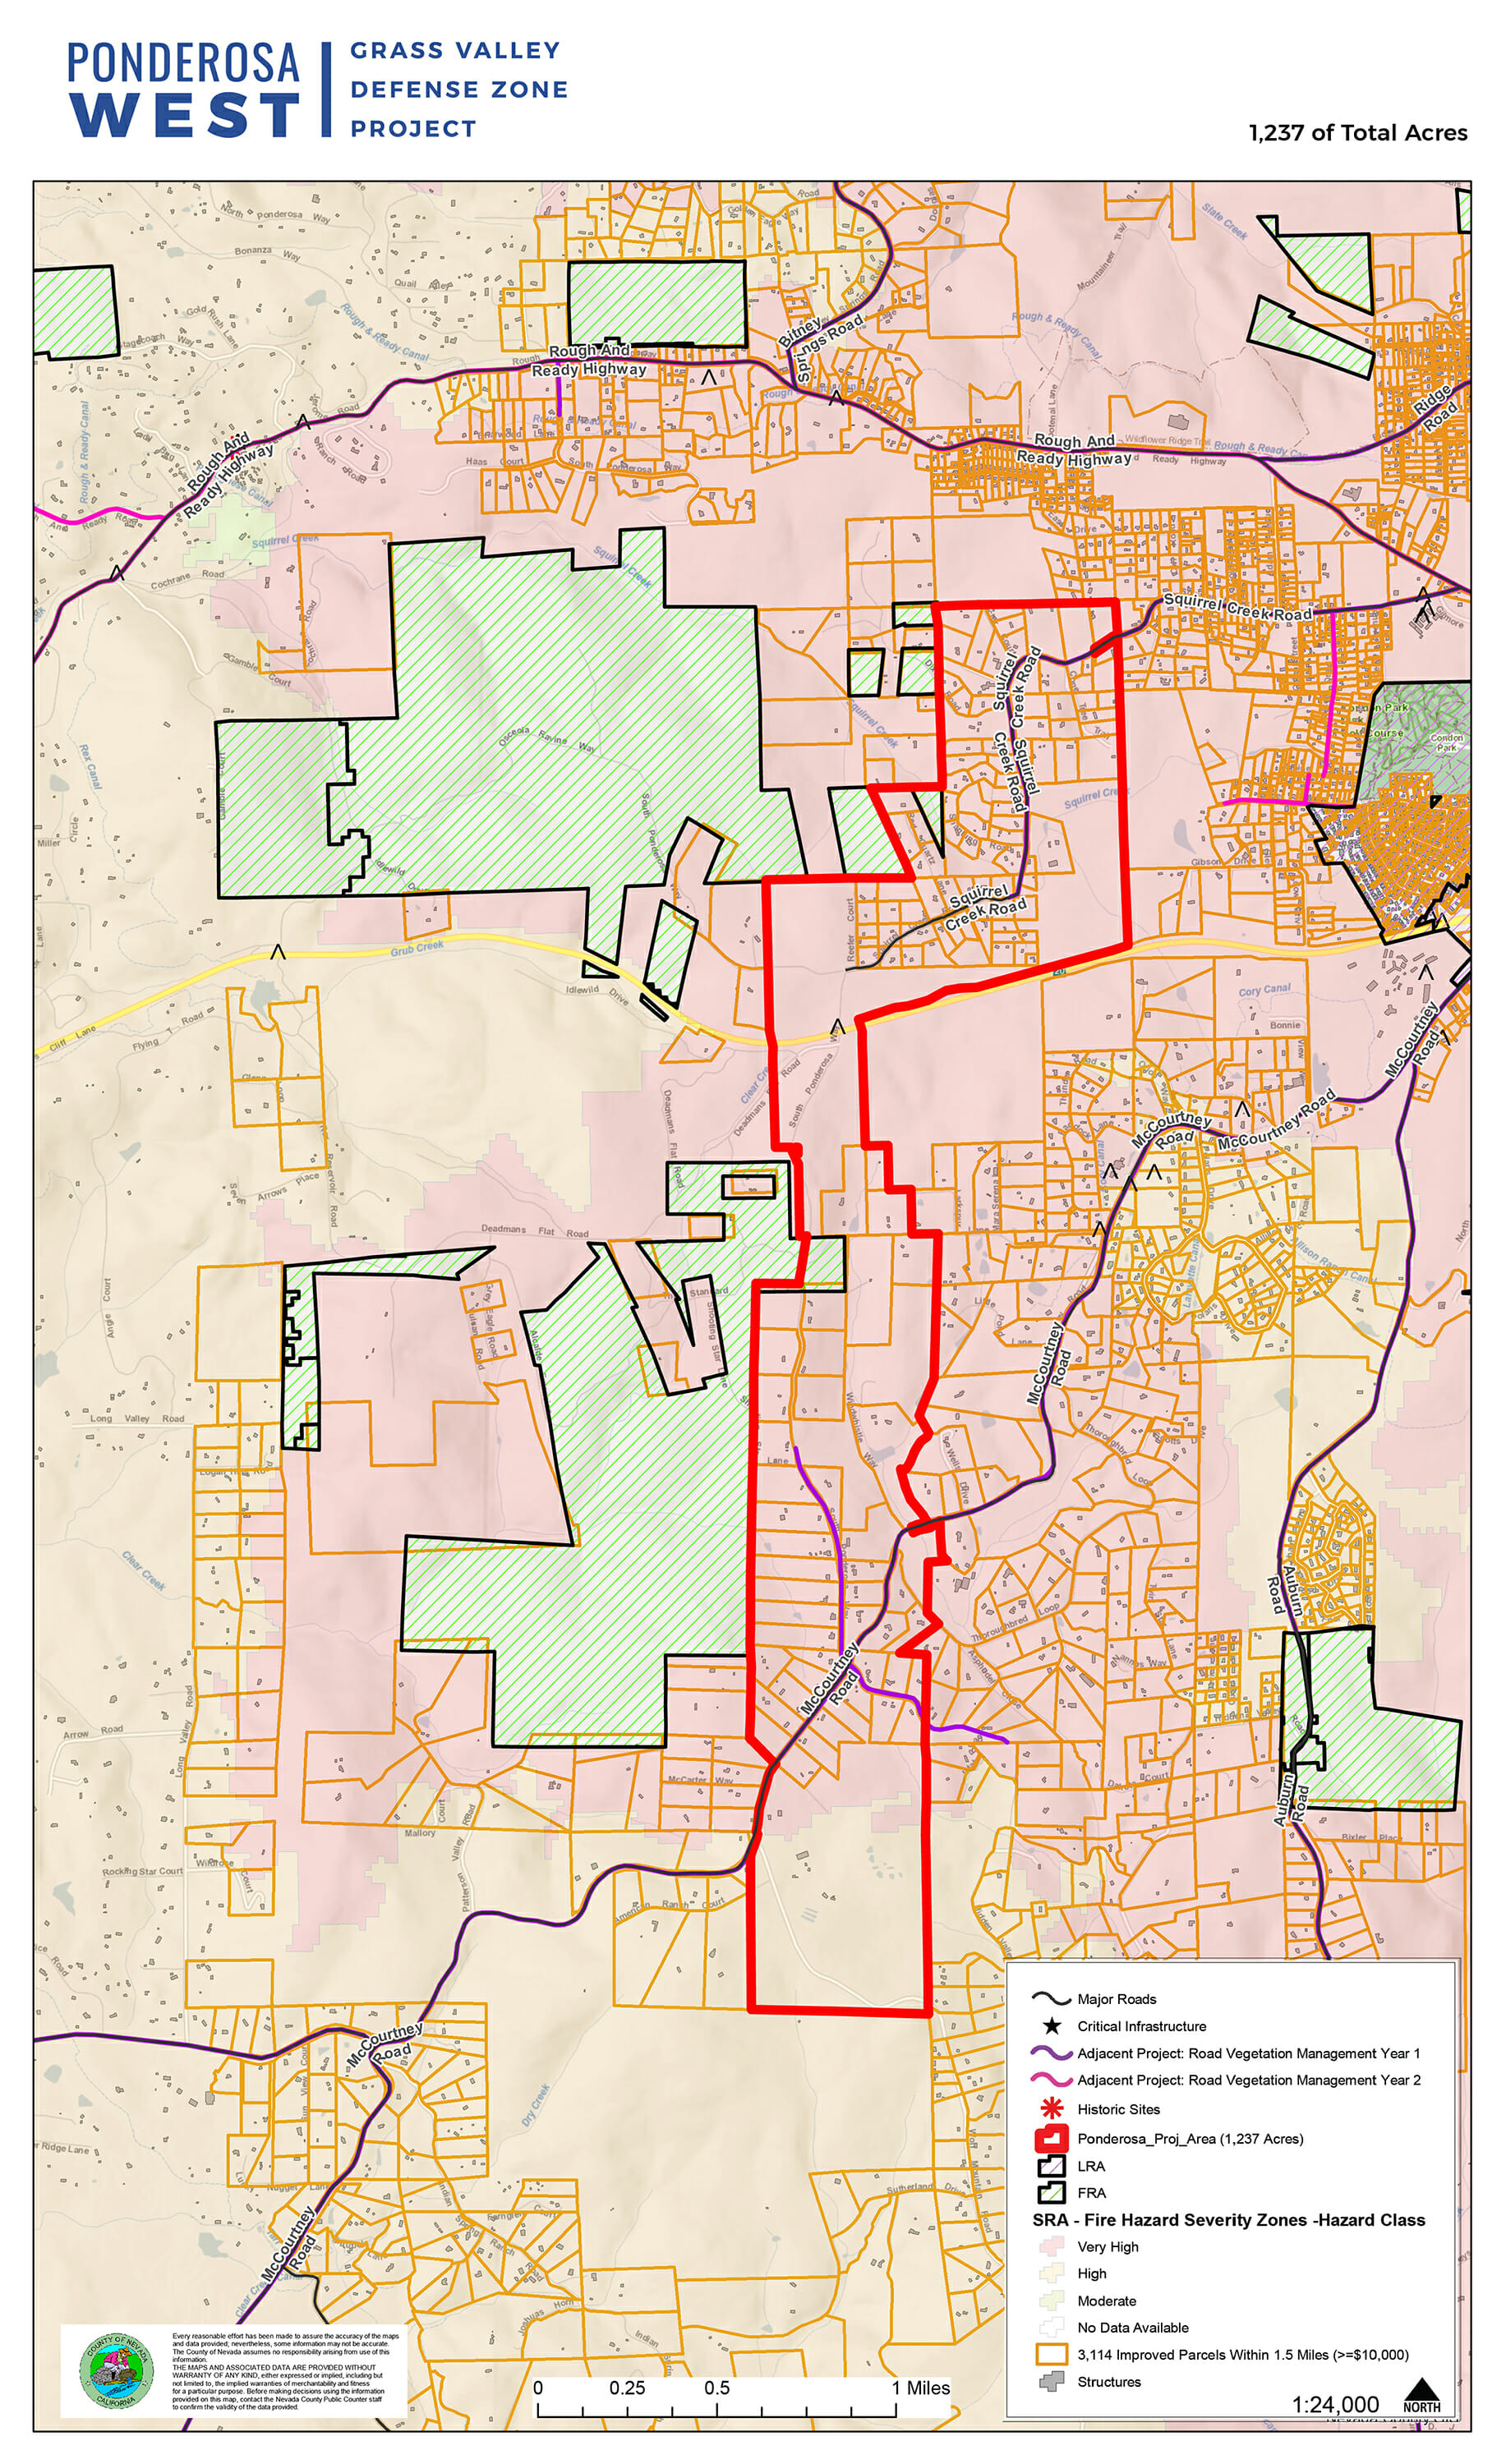 Ponderosa West The Grass Valley Defense Zone Project Closer To Reality Yubanet